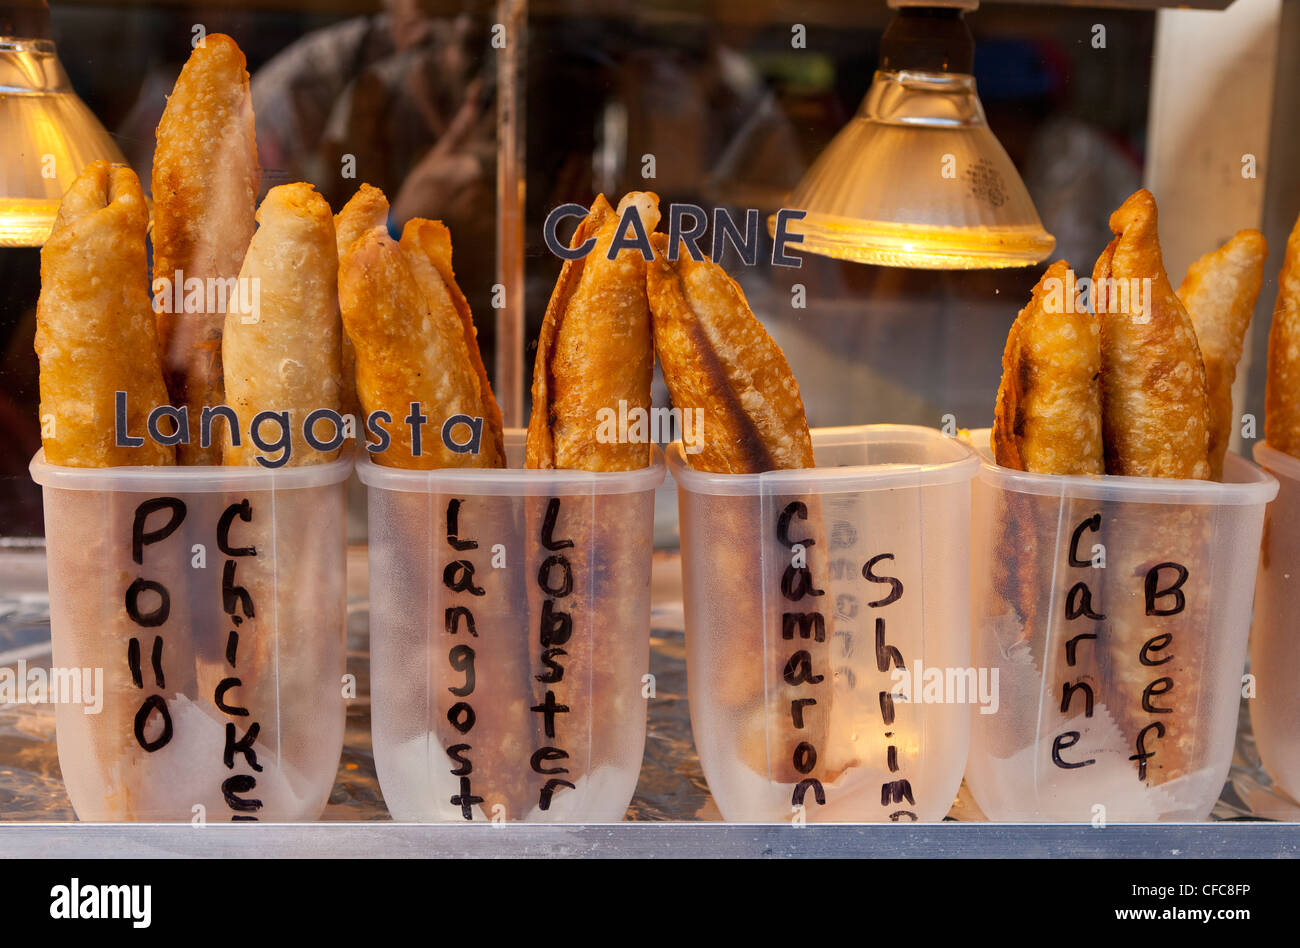 LUQUILLO, PUERTO RICO - Kiosk restaurant typical deep fried snack foods. Stock Photo